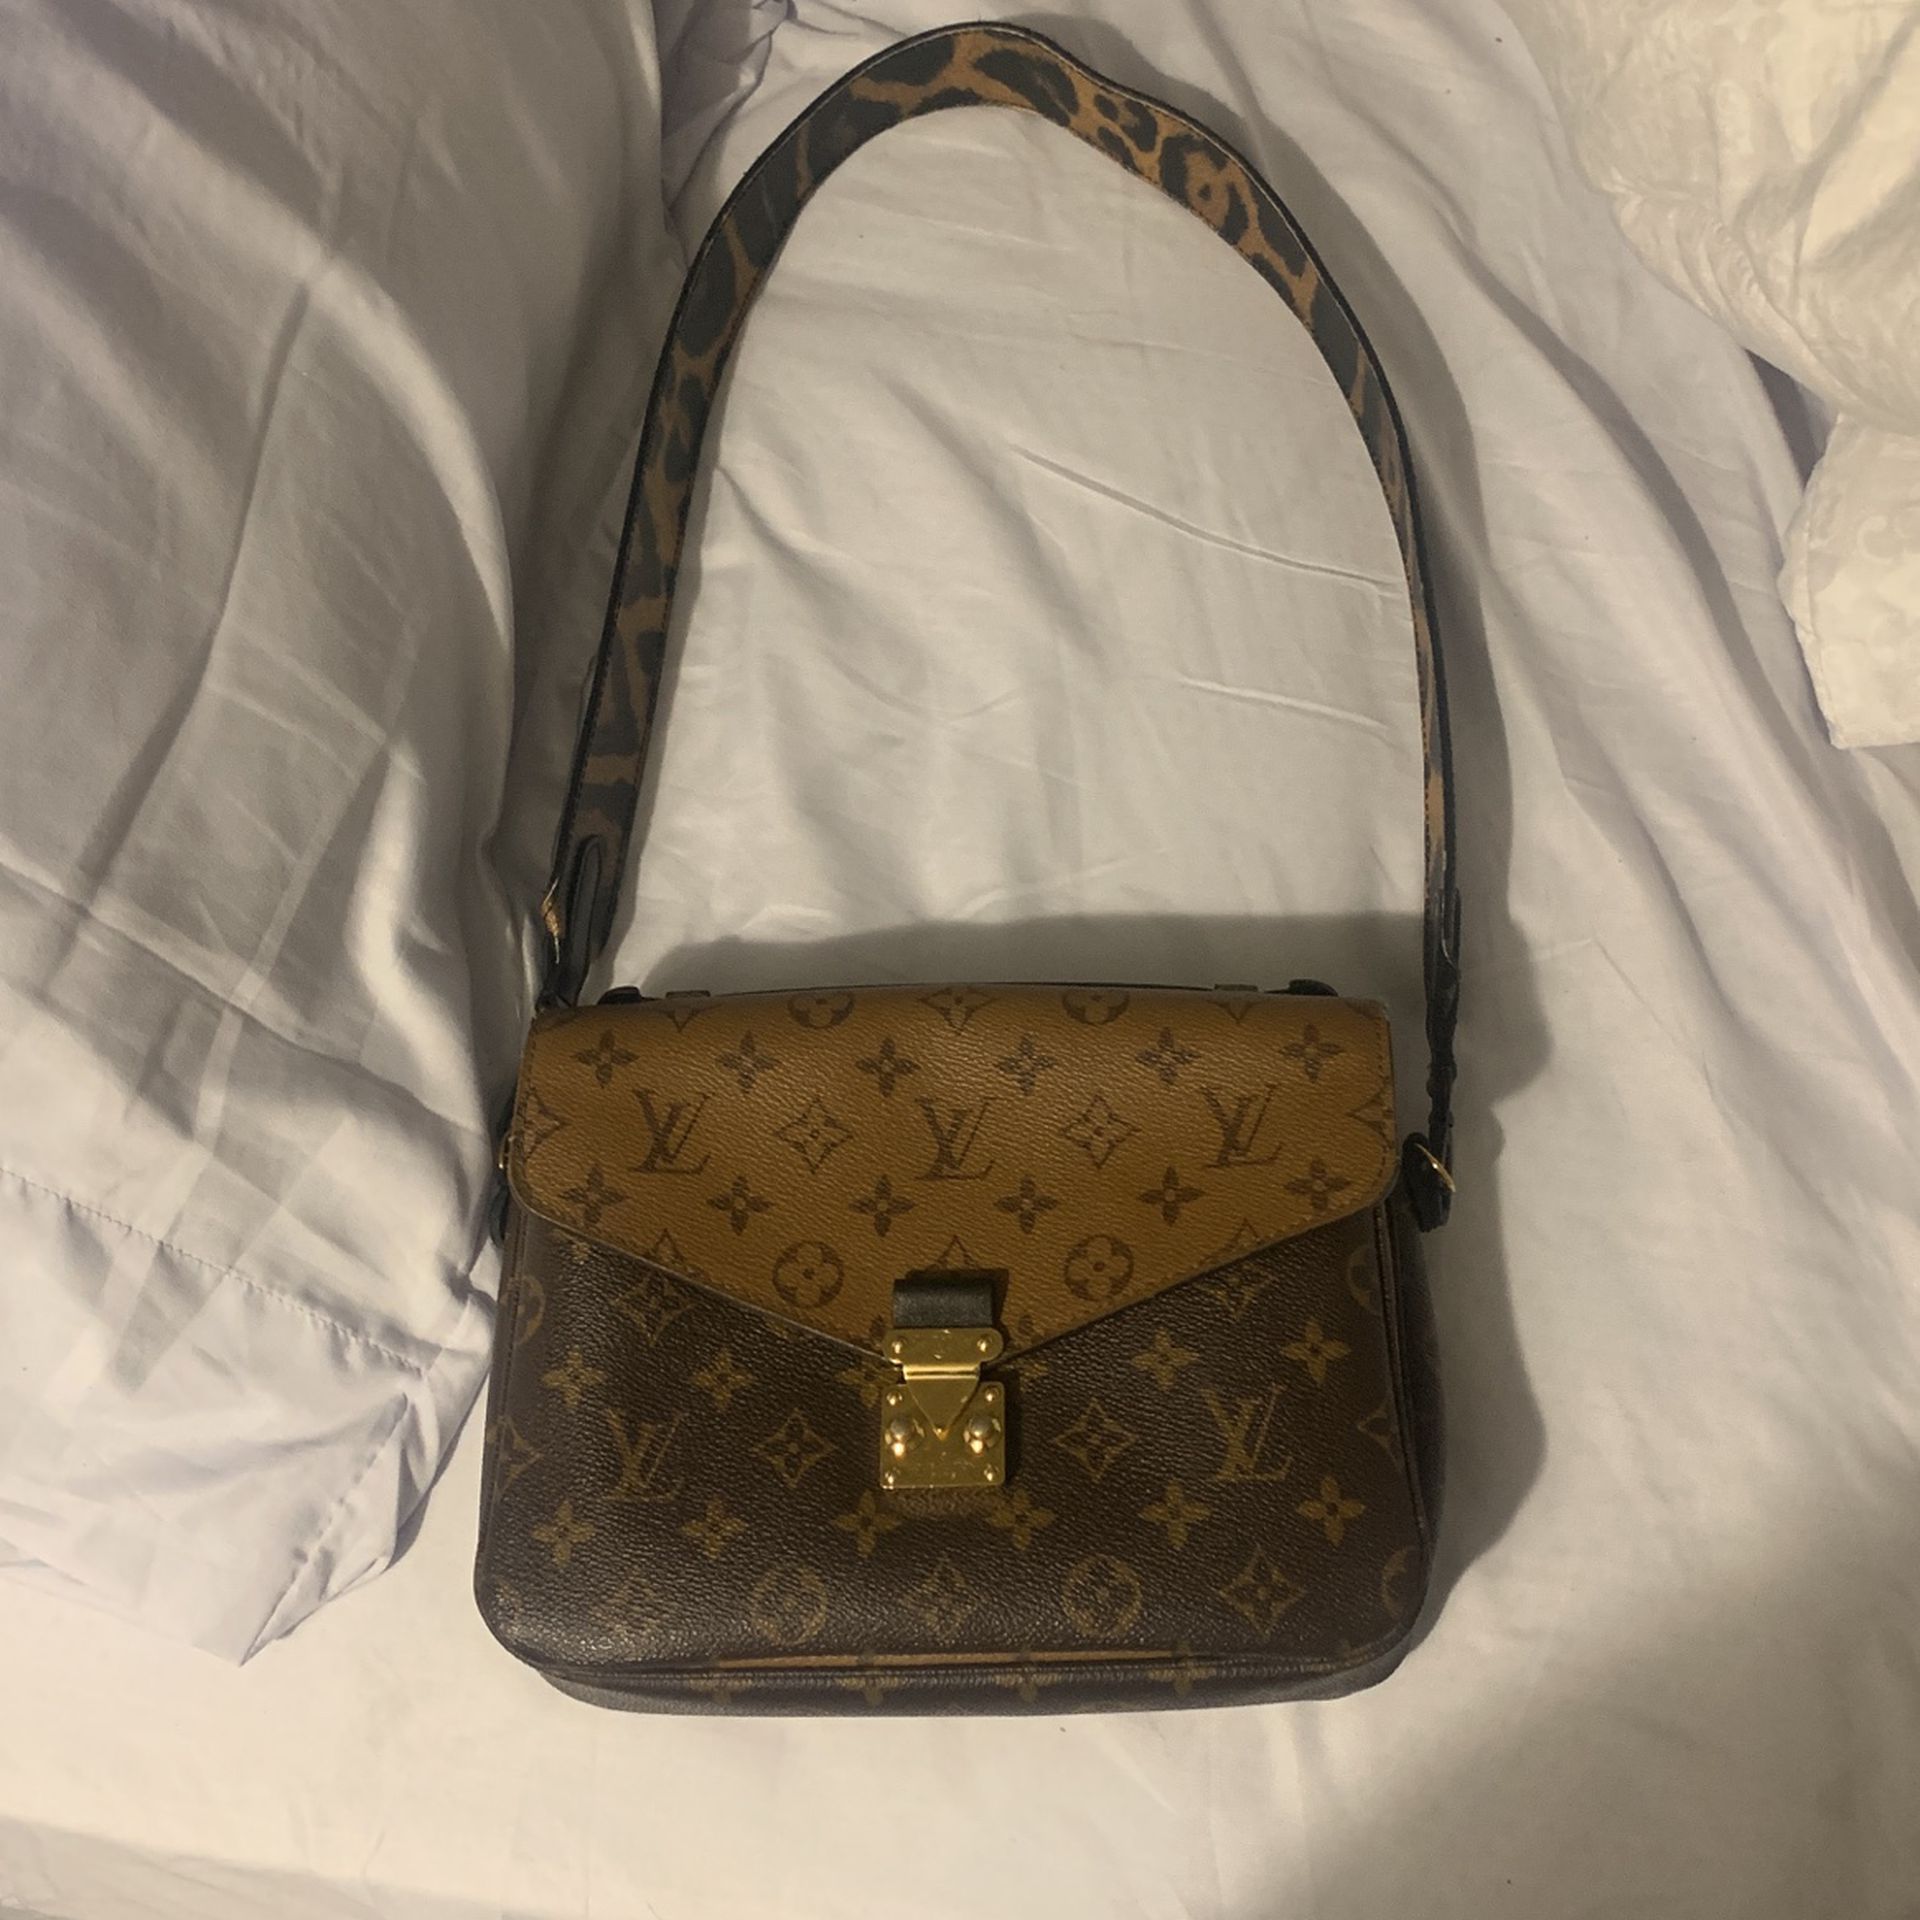 XL Bag Great Condition